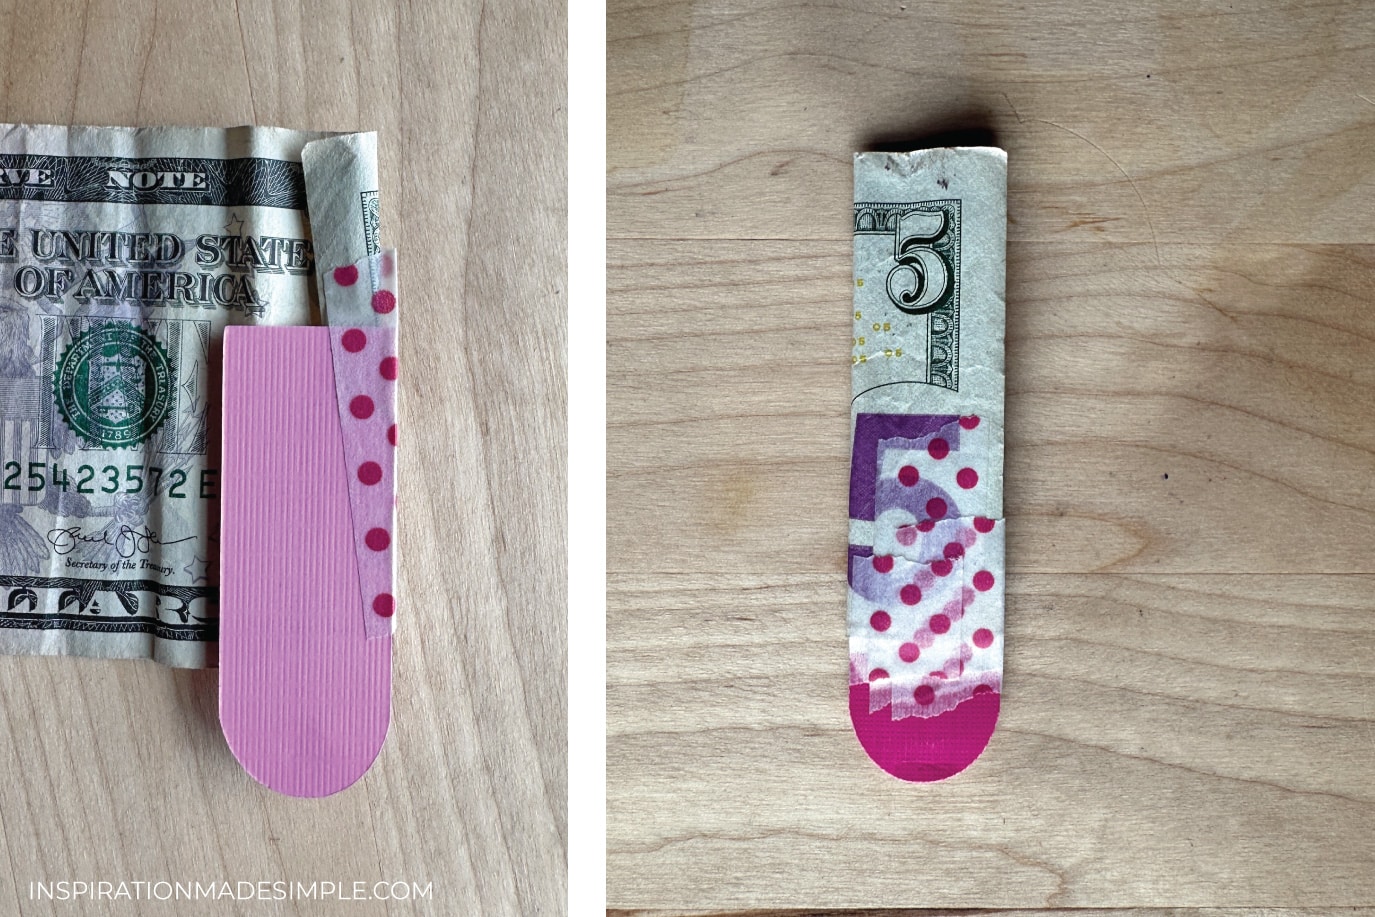 Wrap money around cat tongue and secure with washi tape